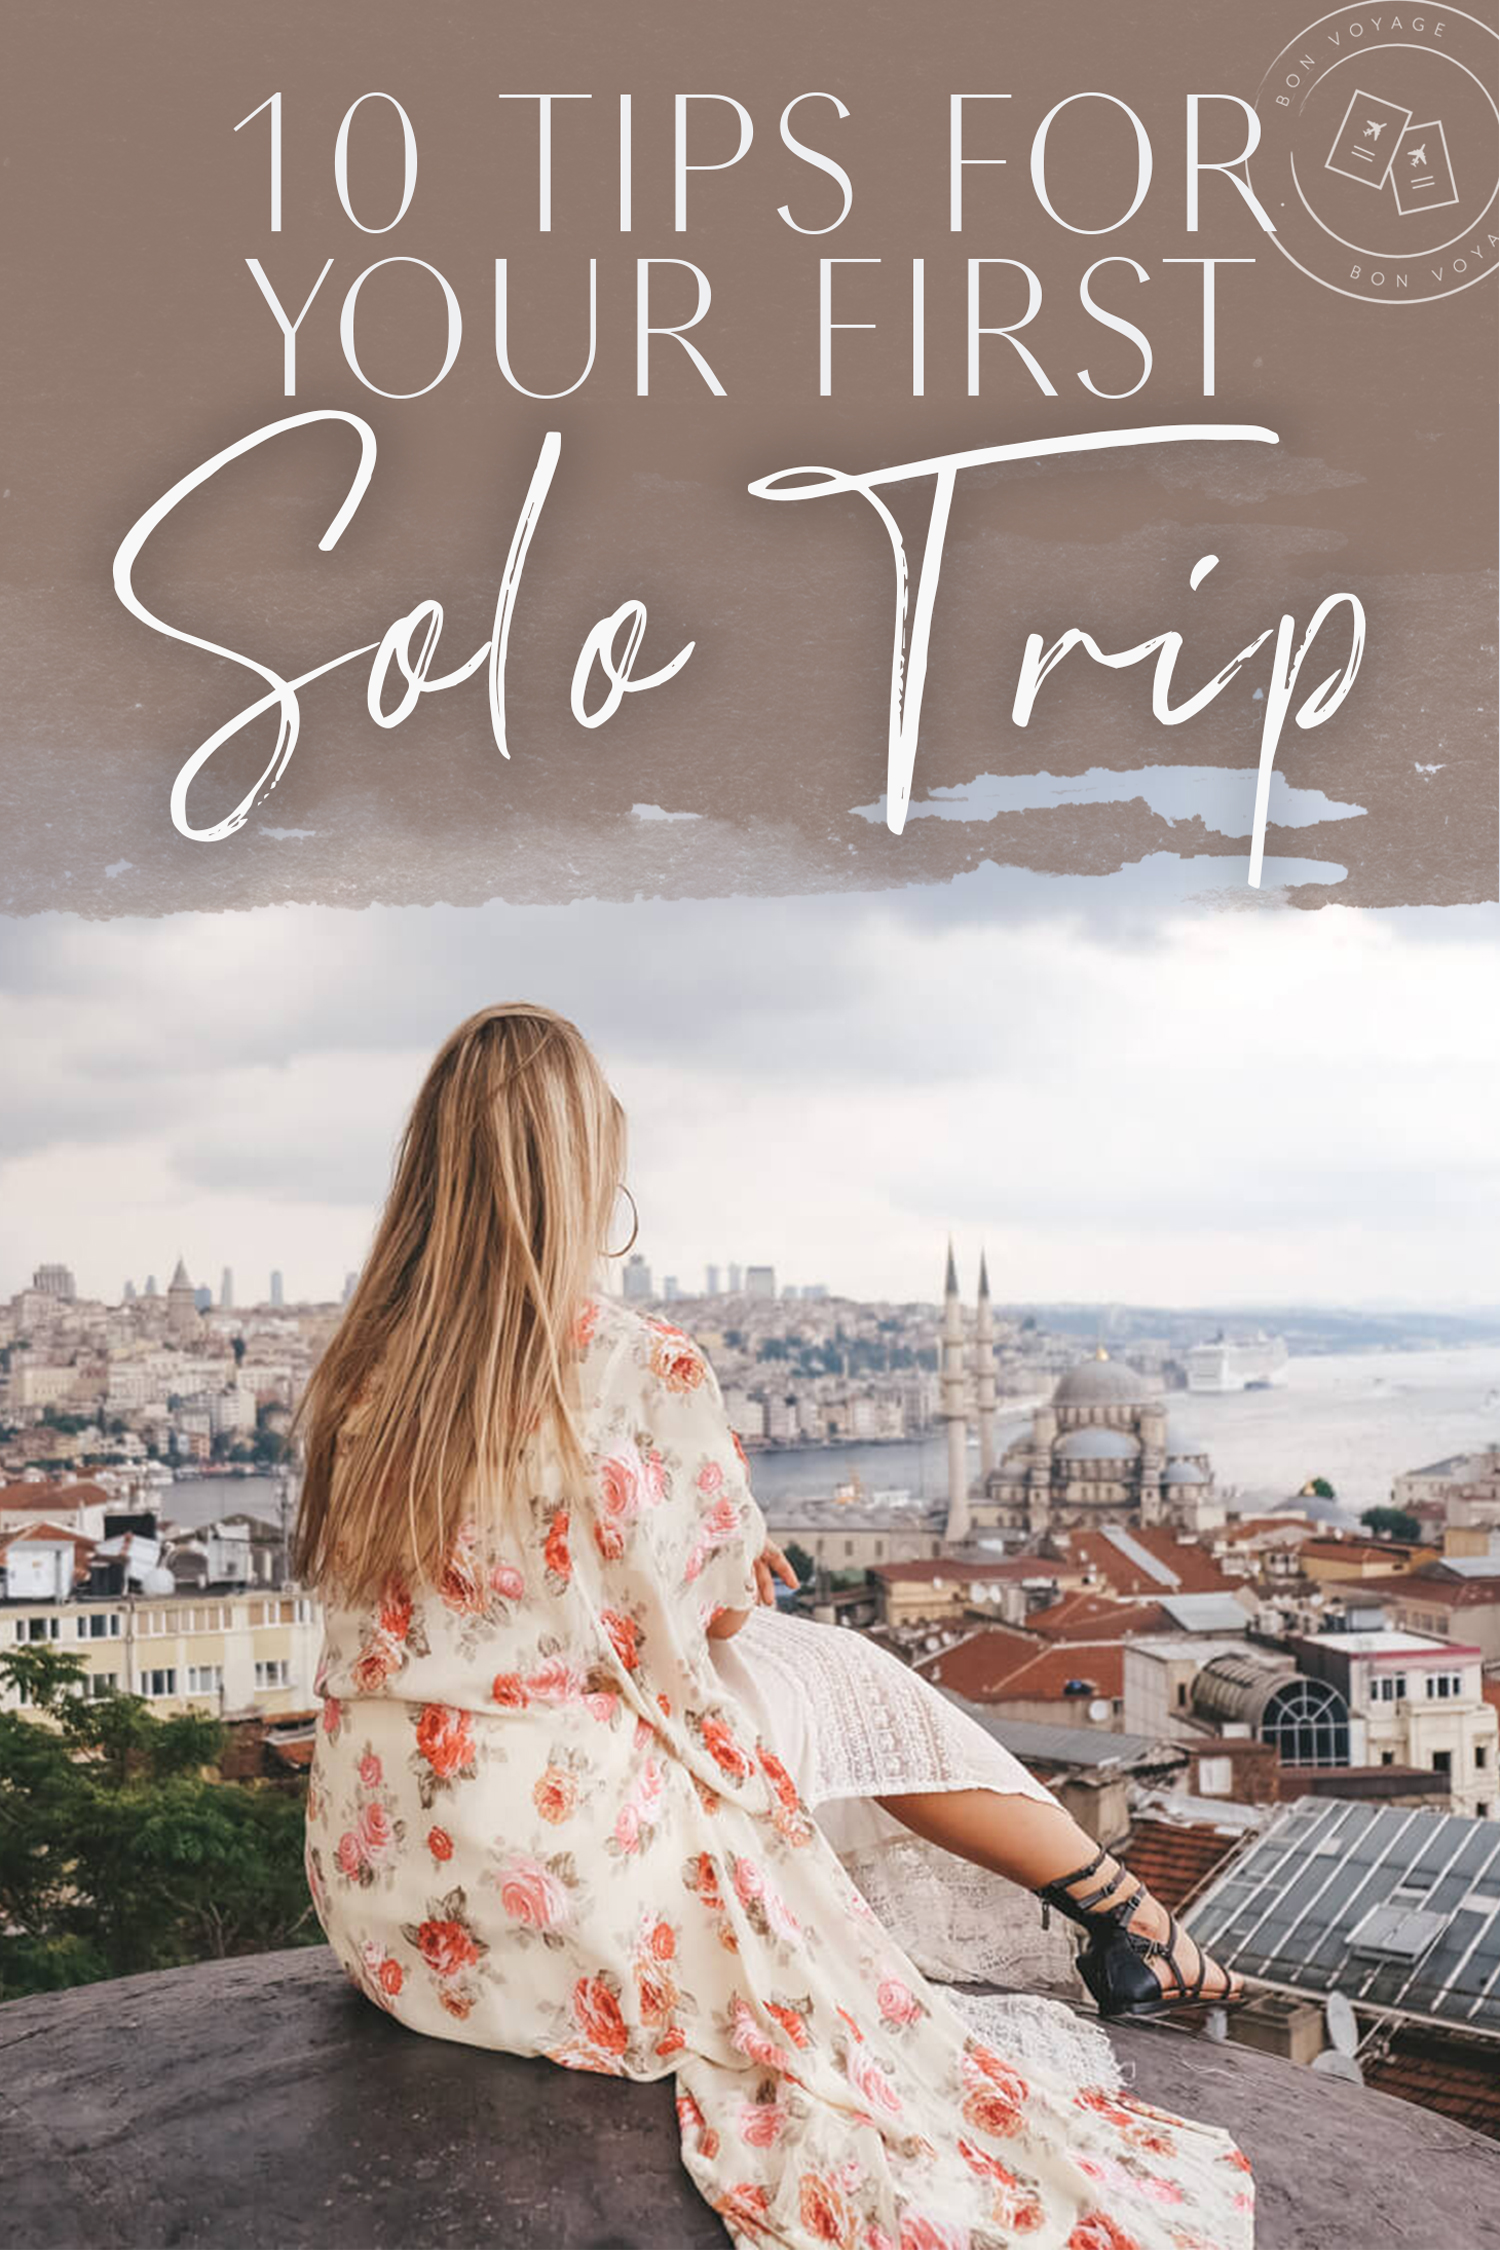 10 Tips for Taking Your First Solo Trip